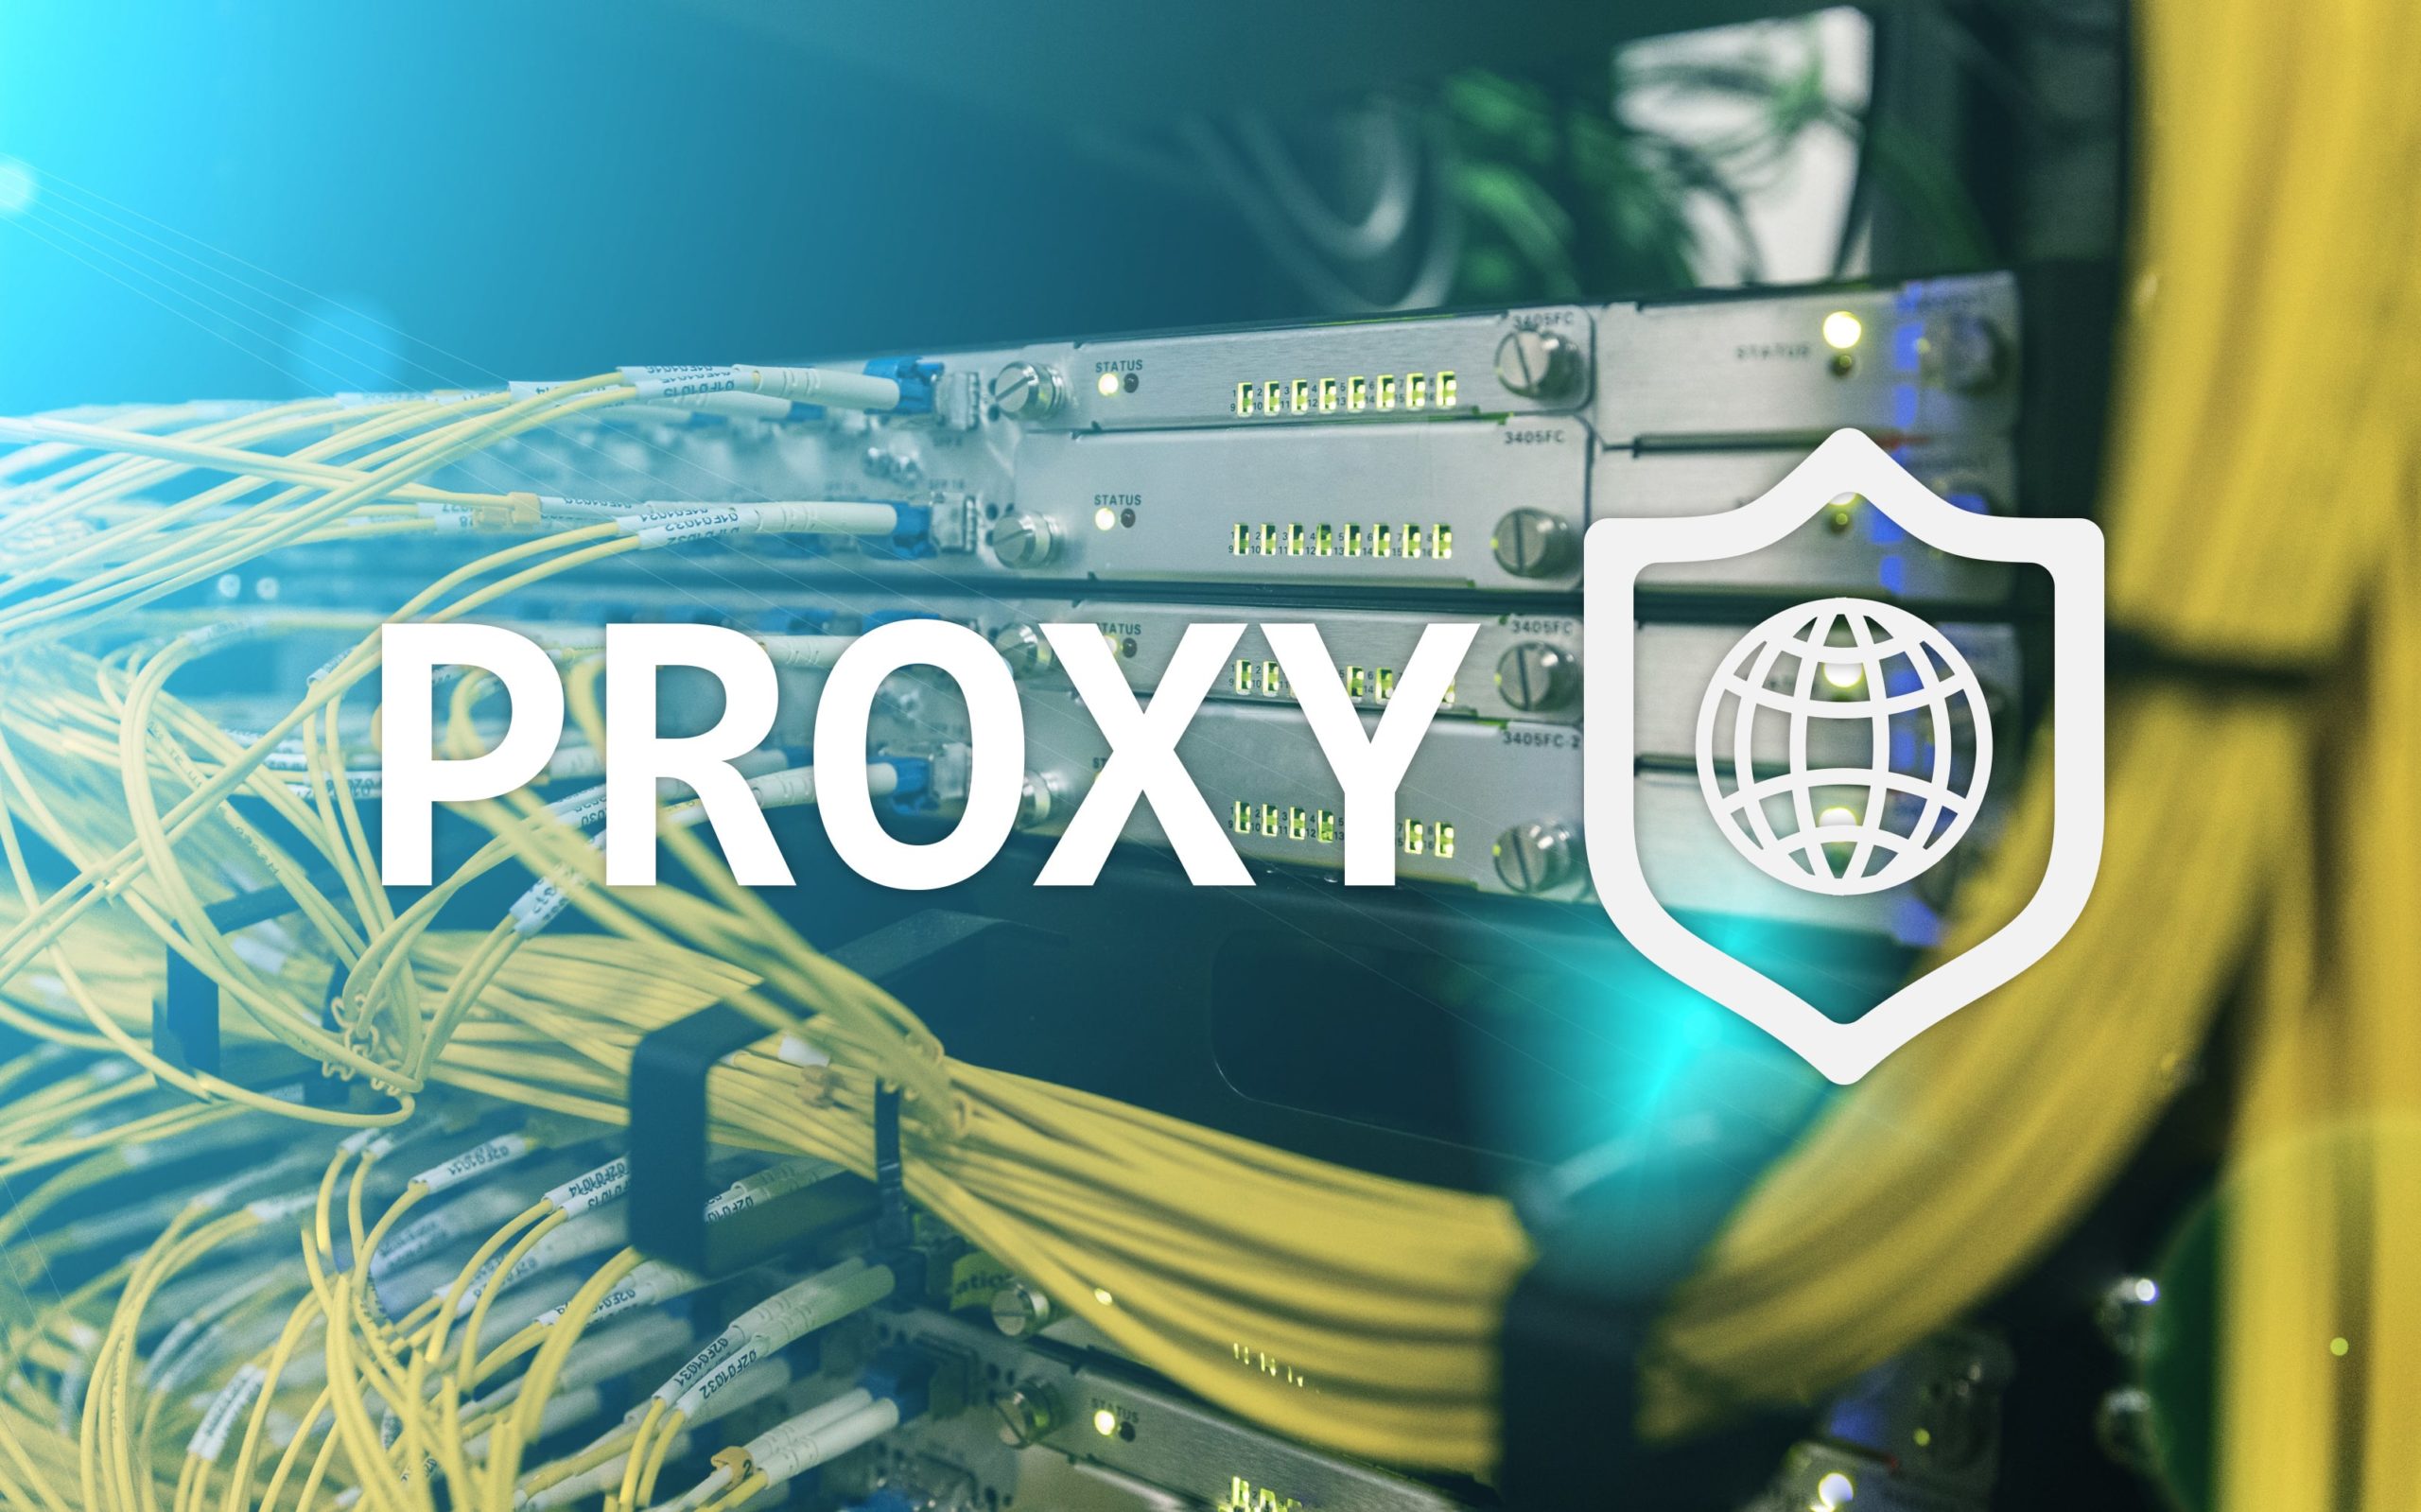 What Are The Benefits Of Rotating Proxies?